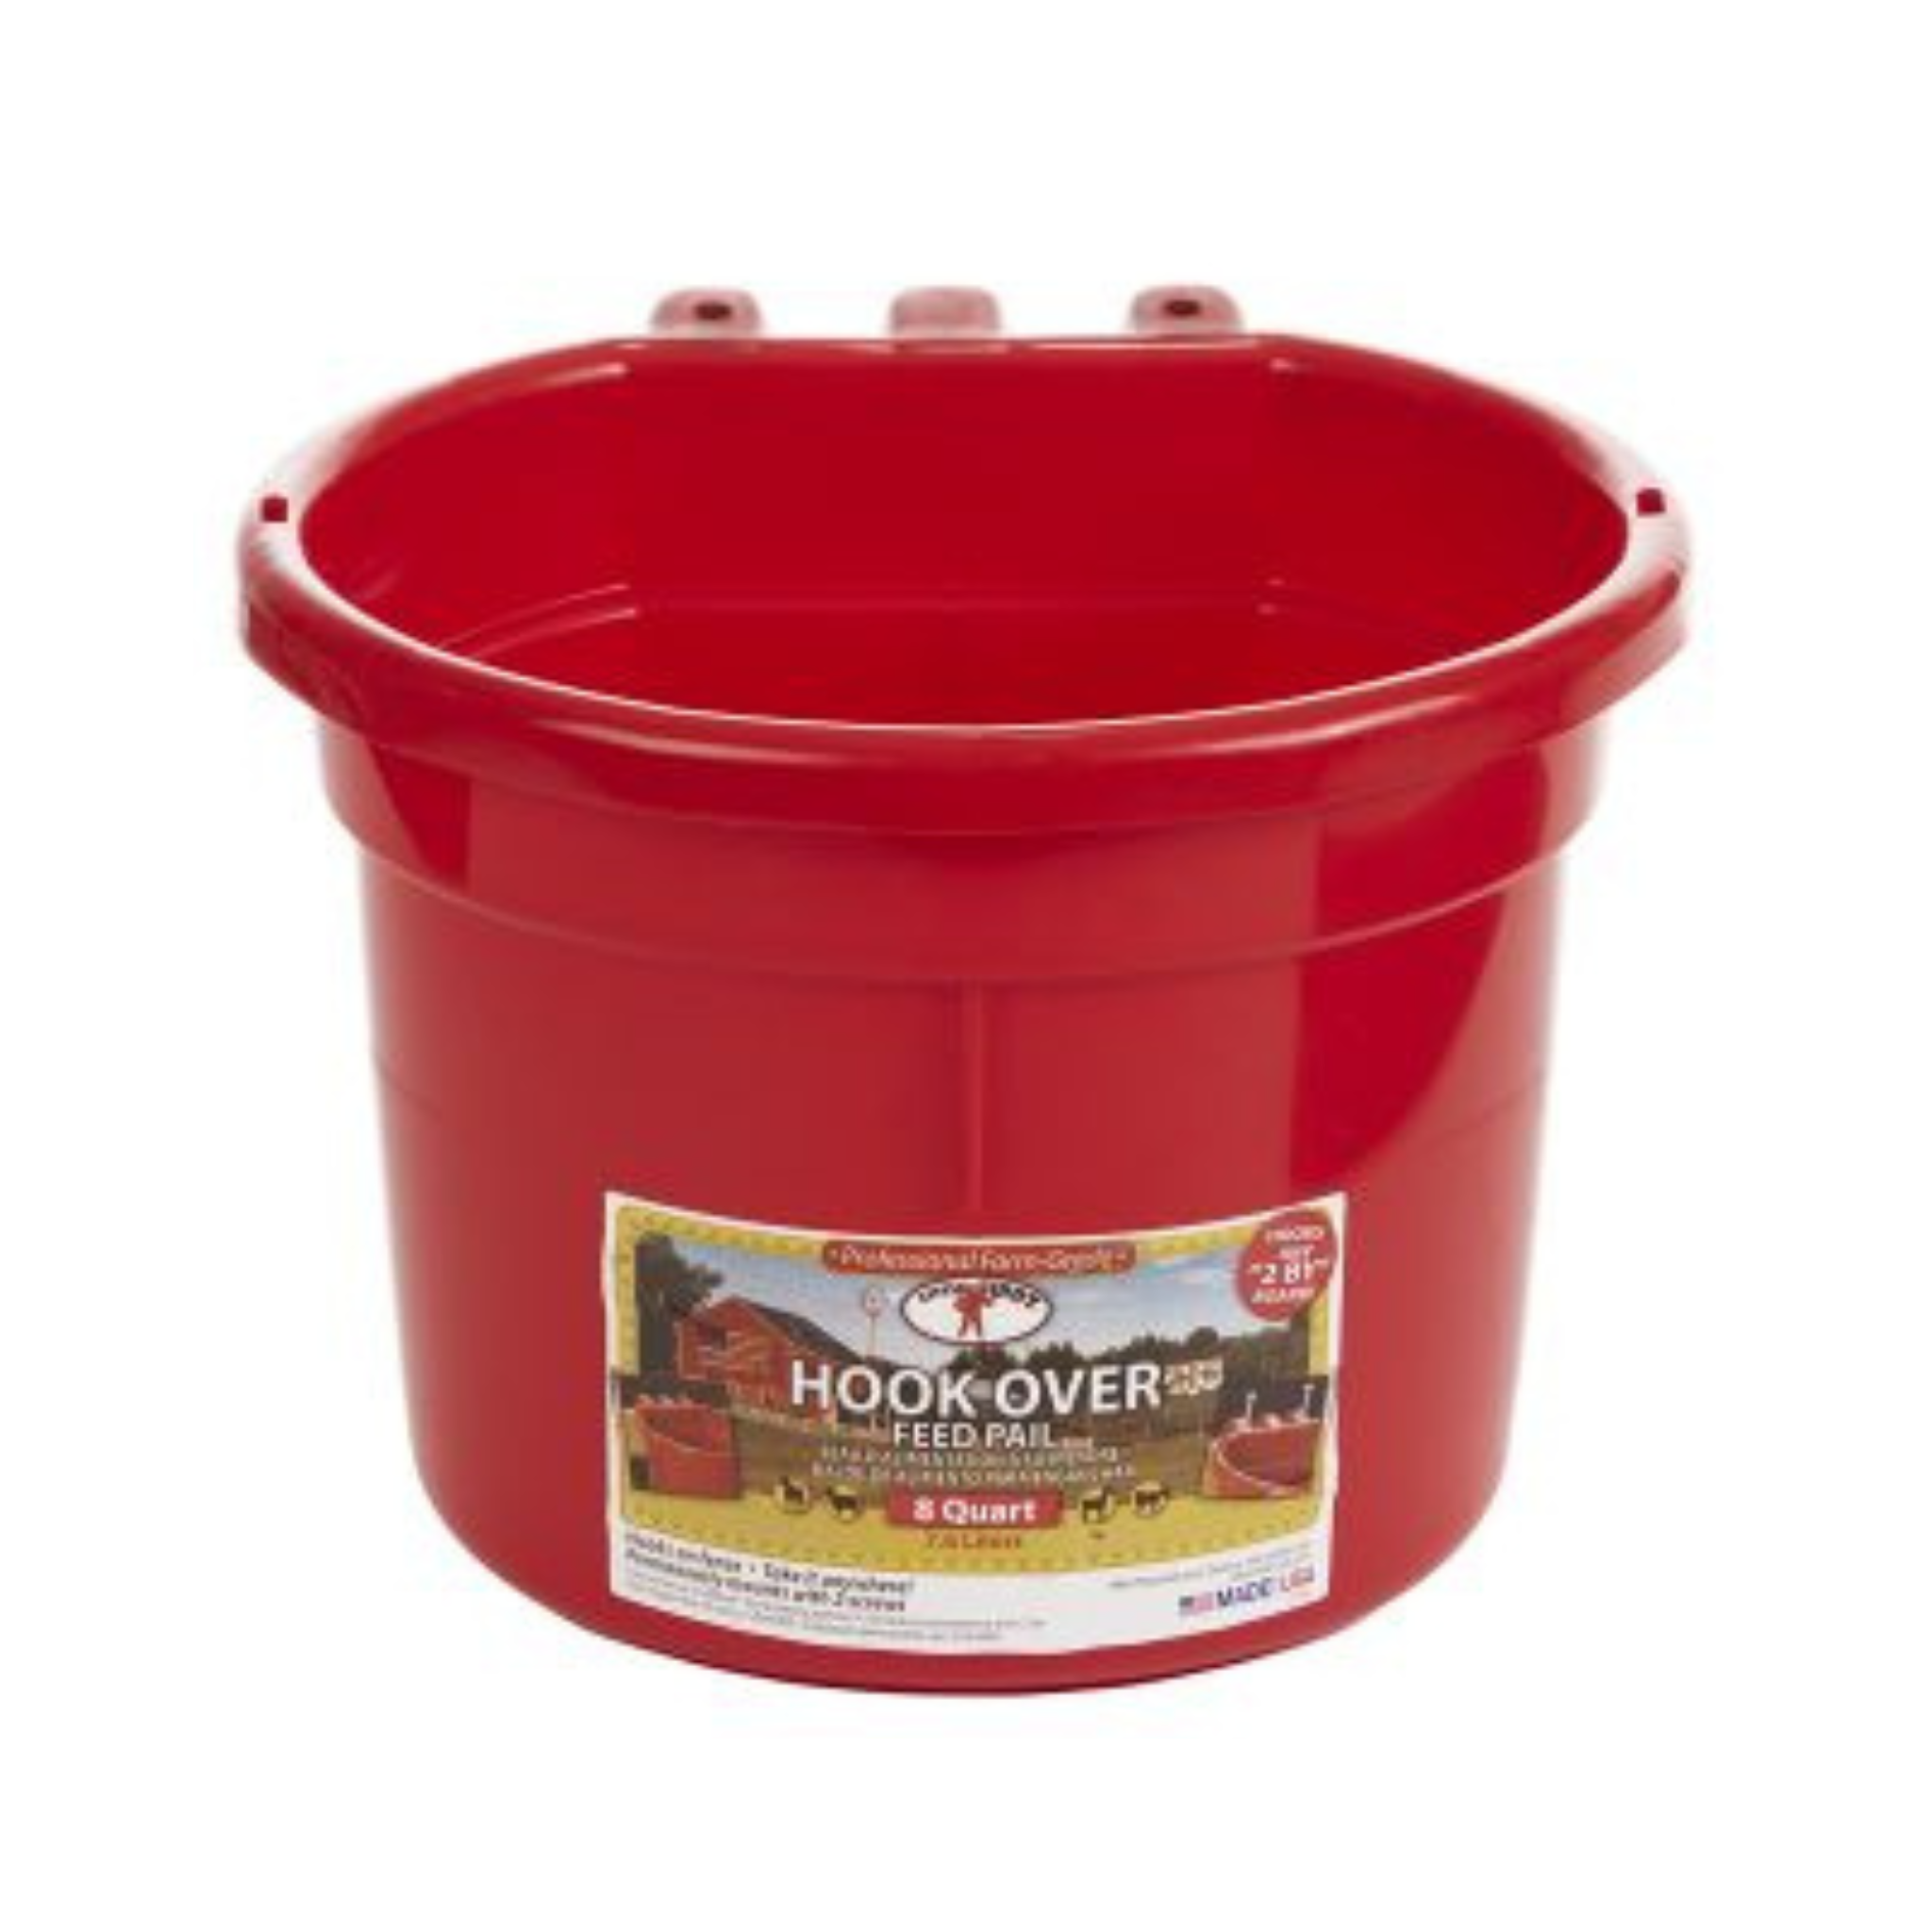 8 Quart Hook Over Feed Pail